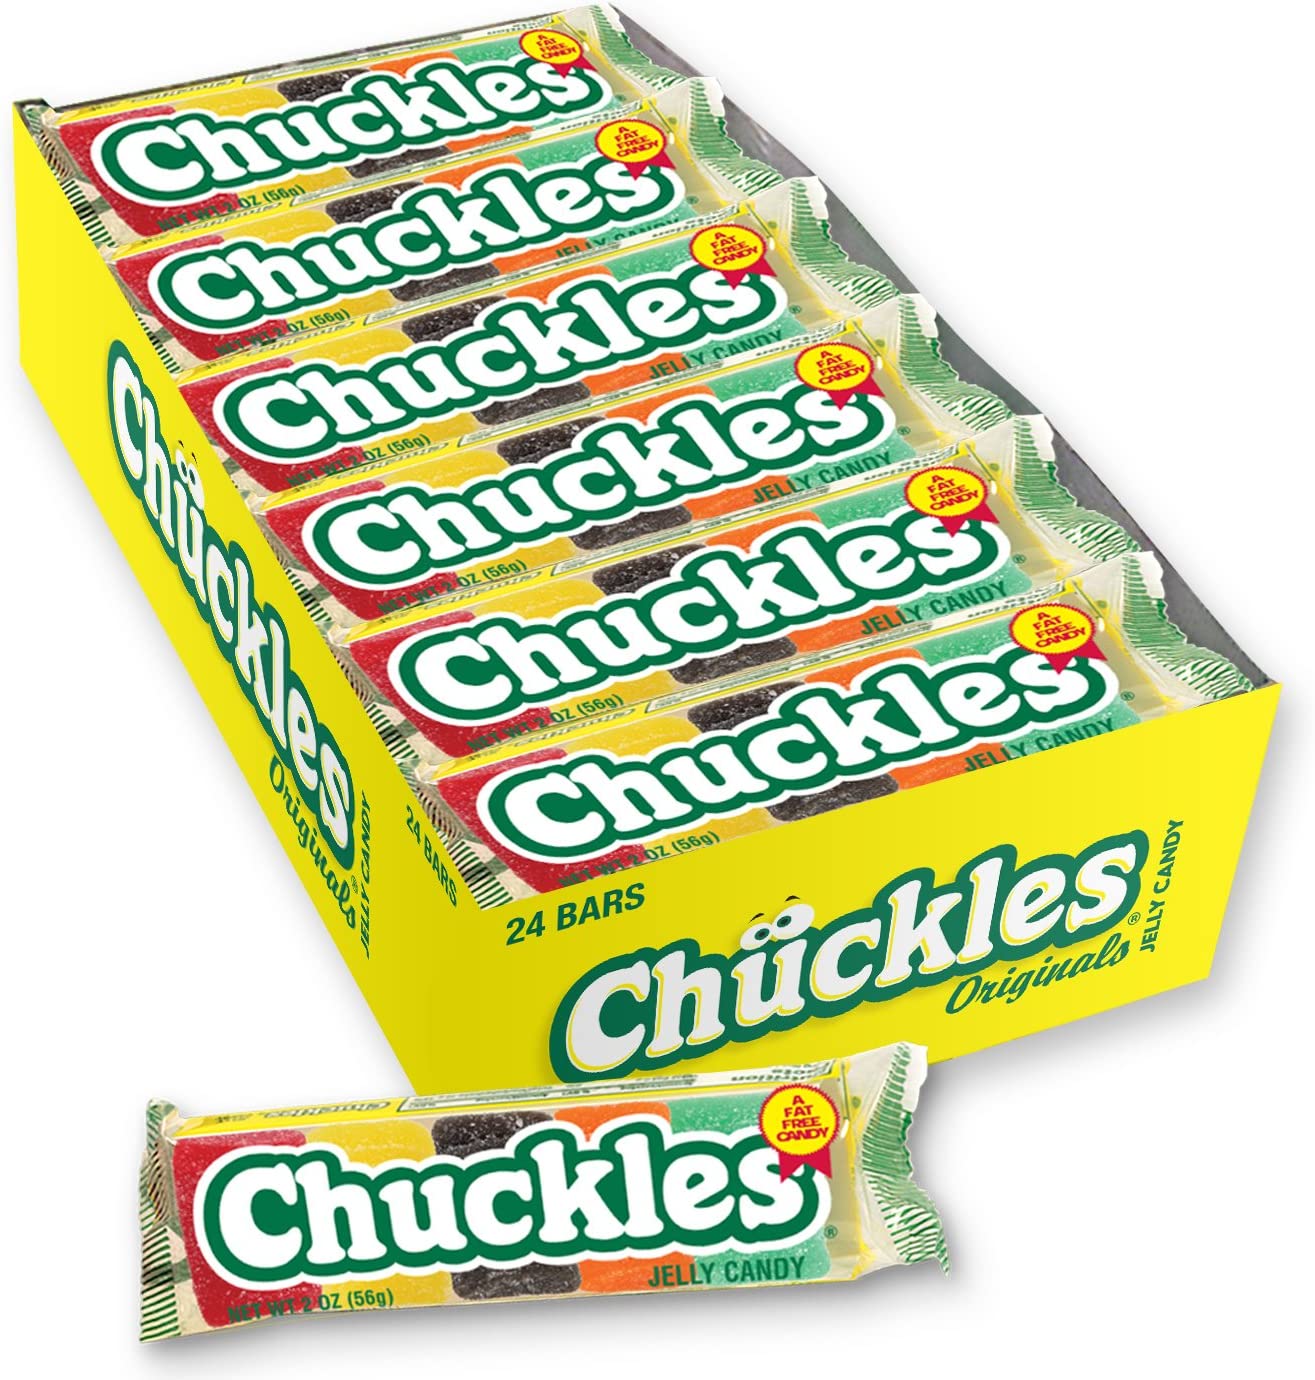 Farley's & Sathers Chuckles, 2-Ounce Boxes (Pack of 24), Original Version